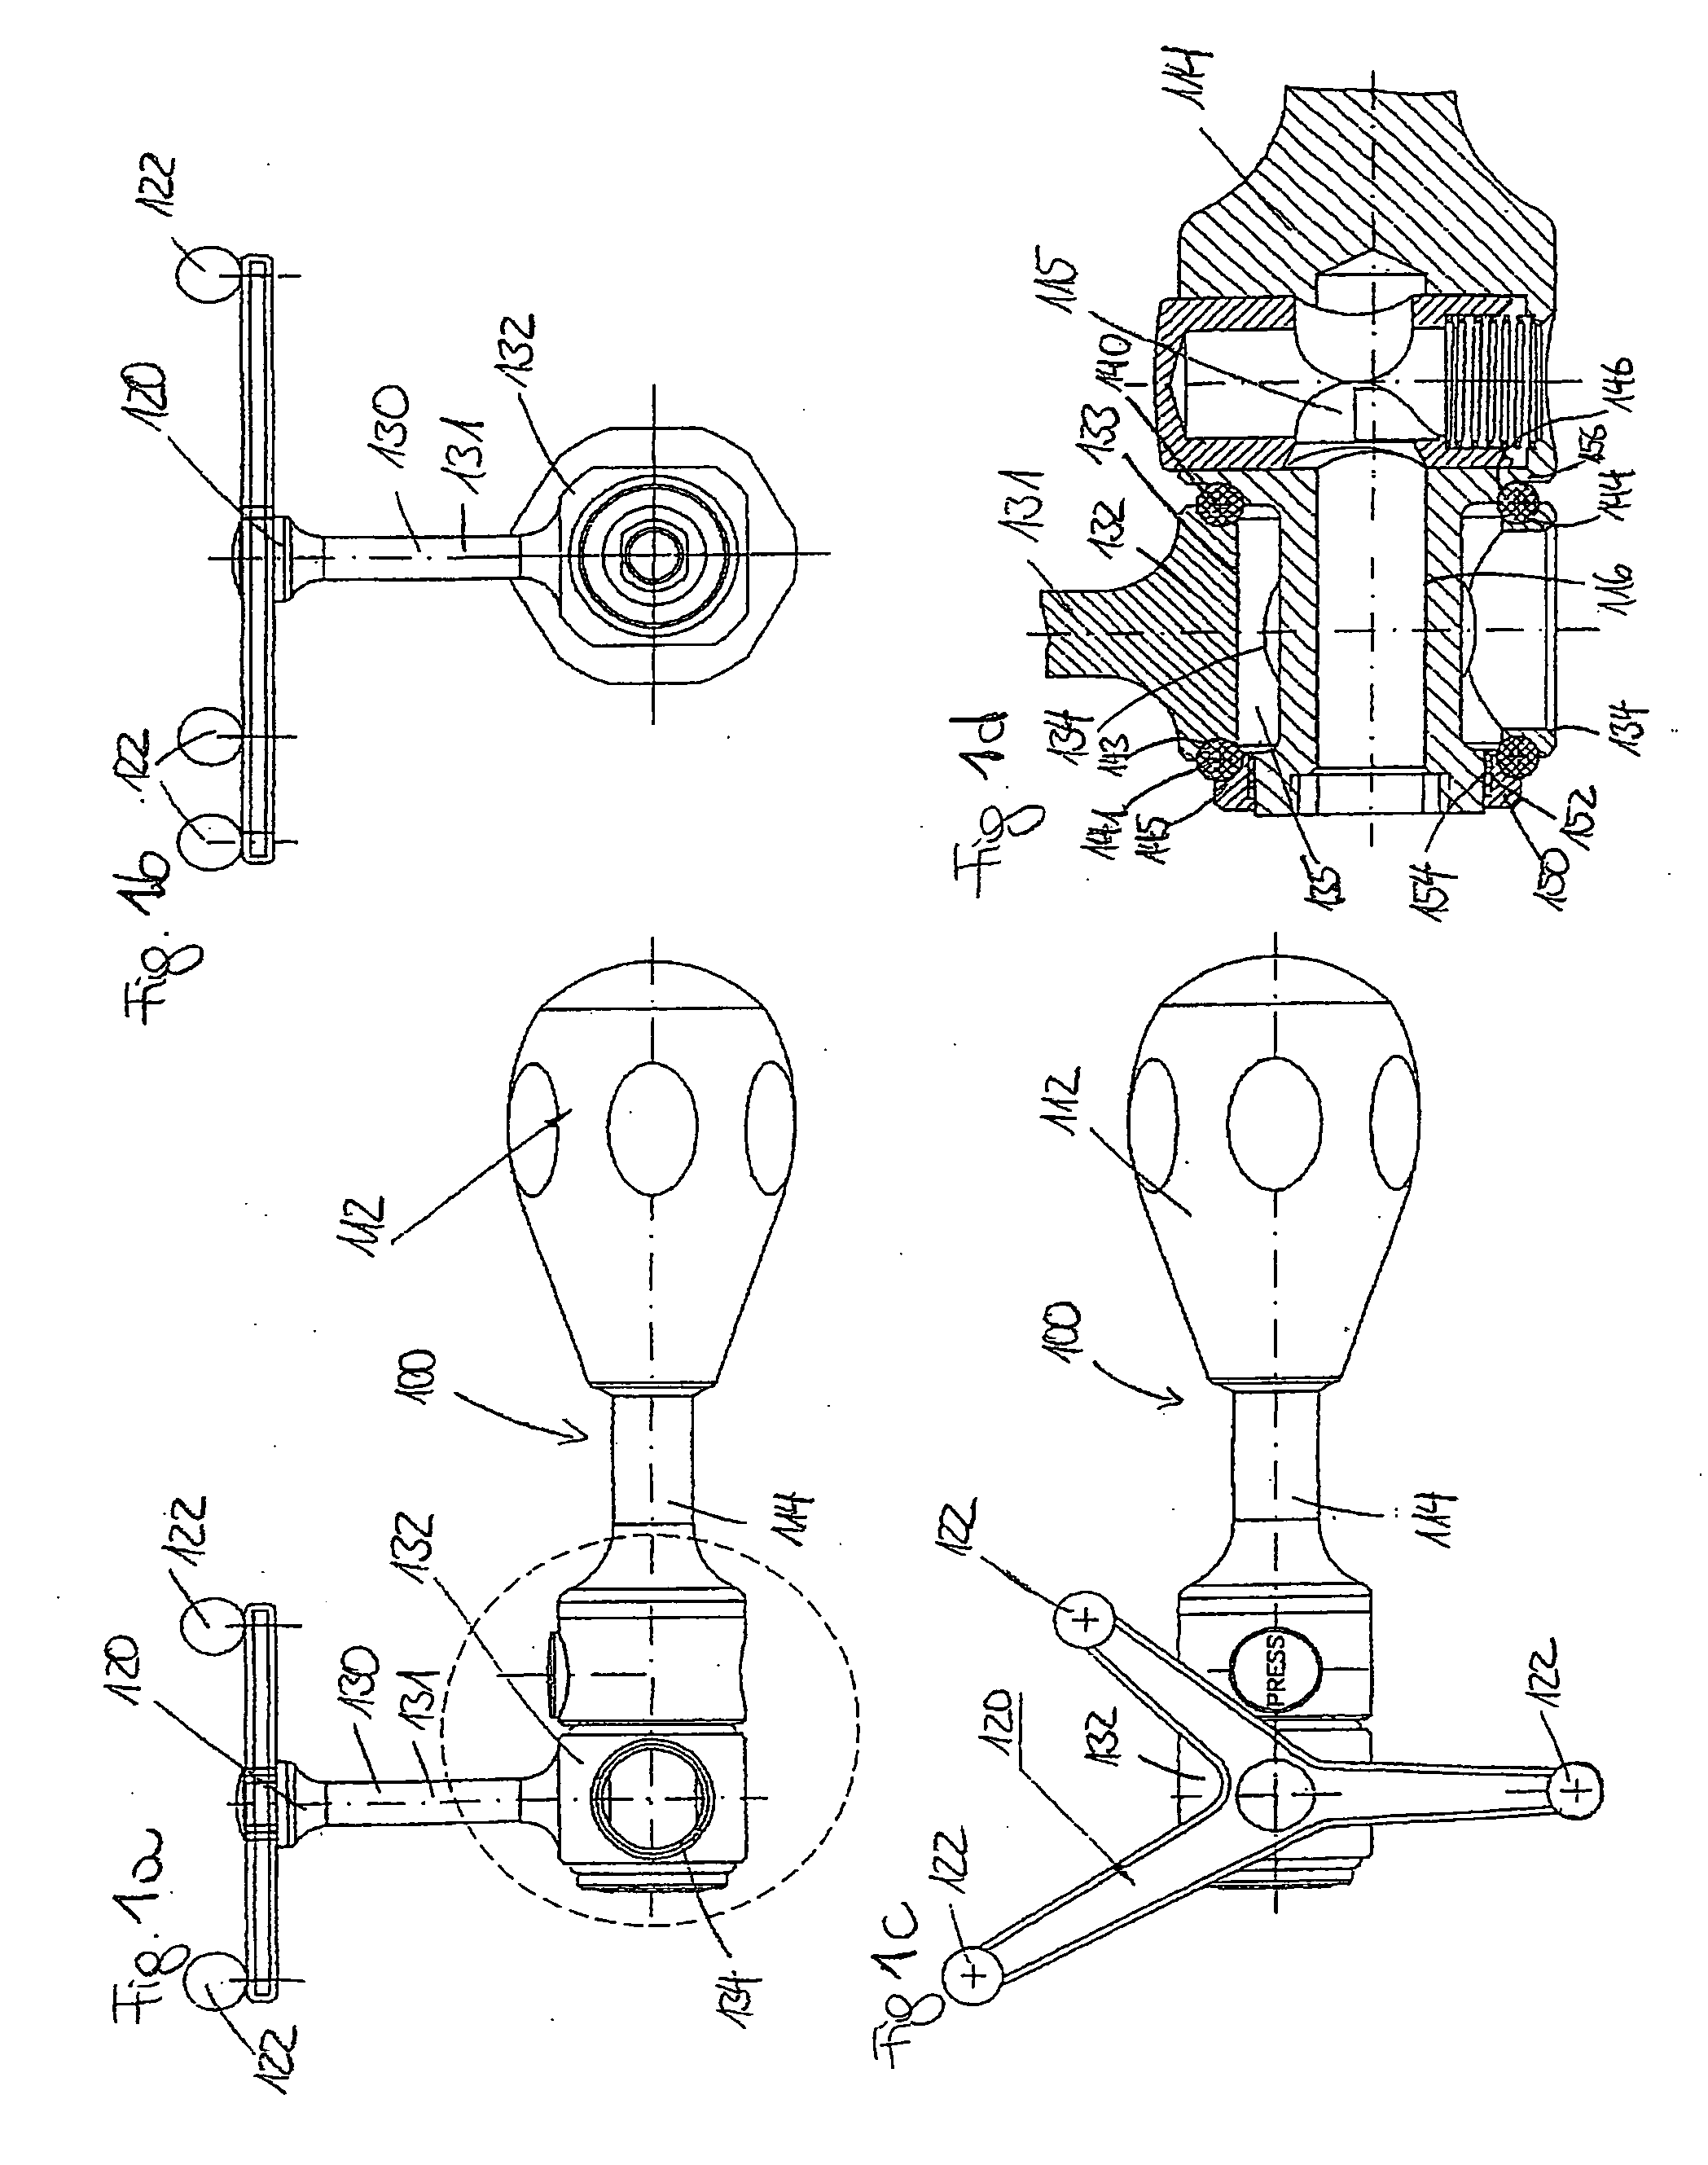 Device for detecting spatial position